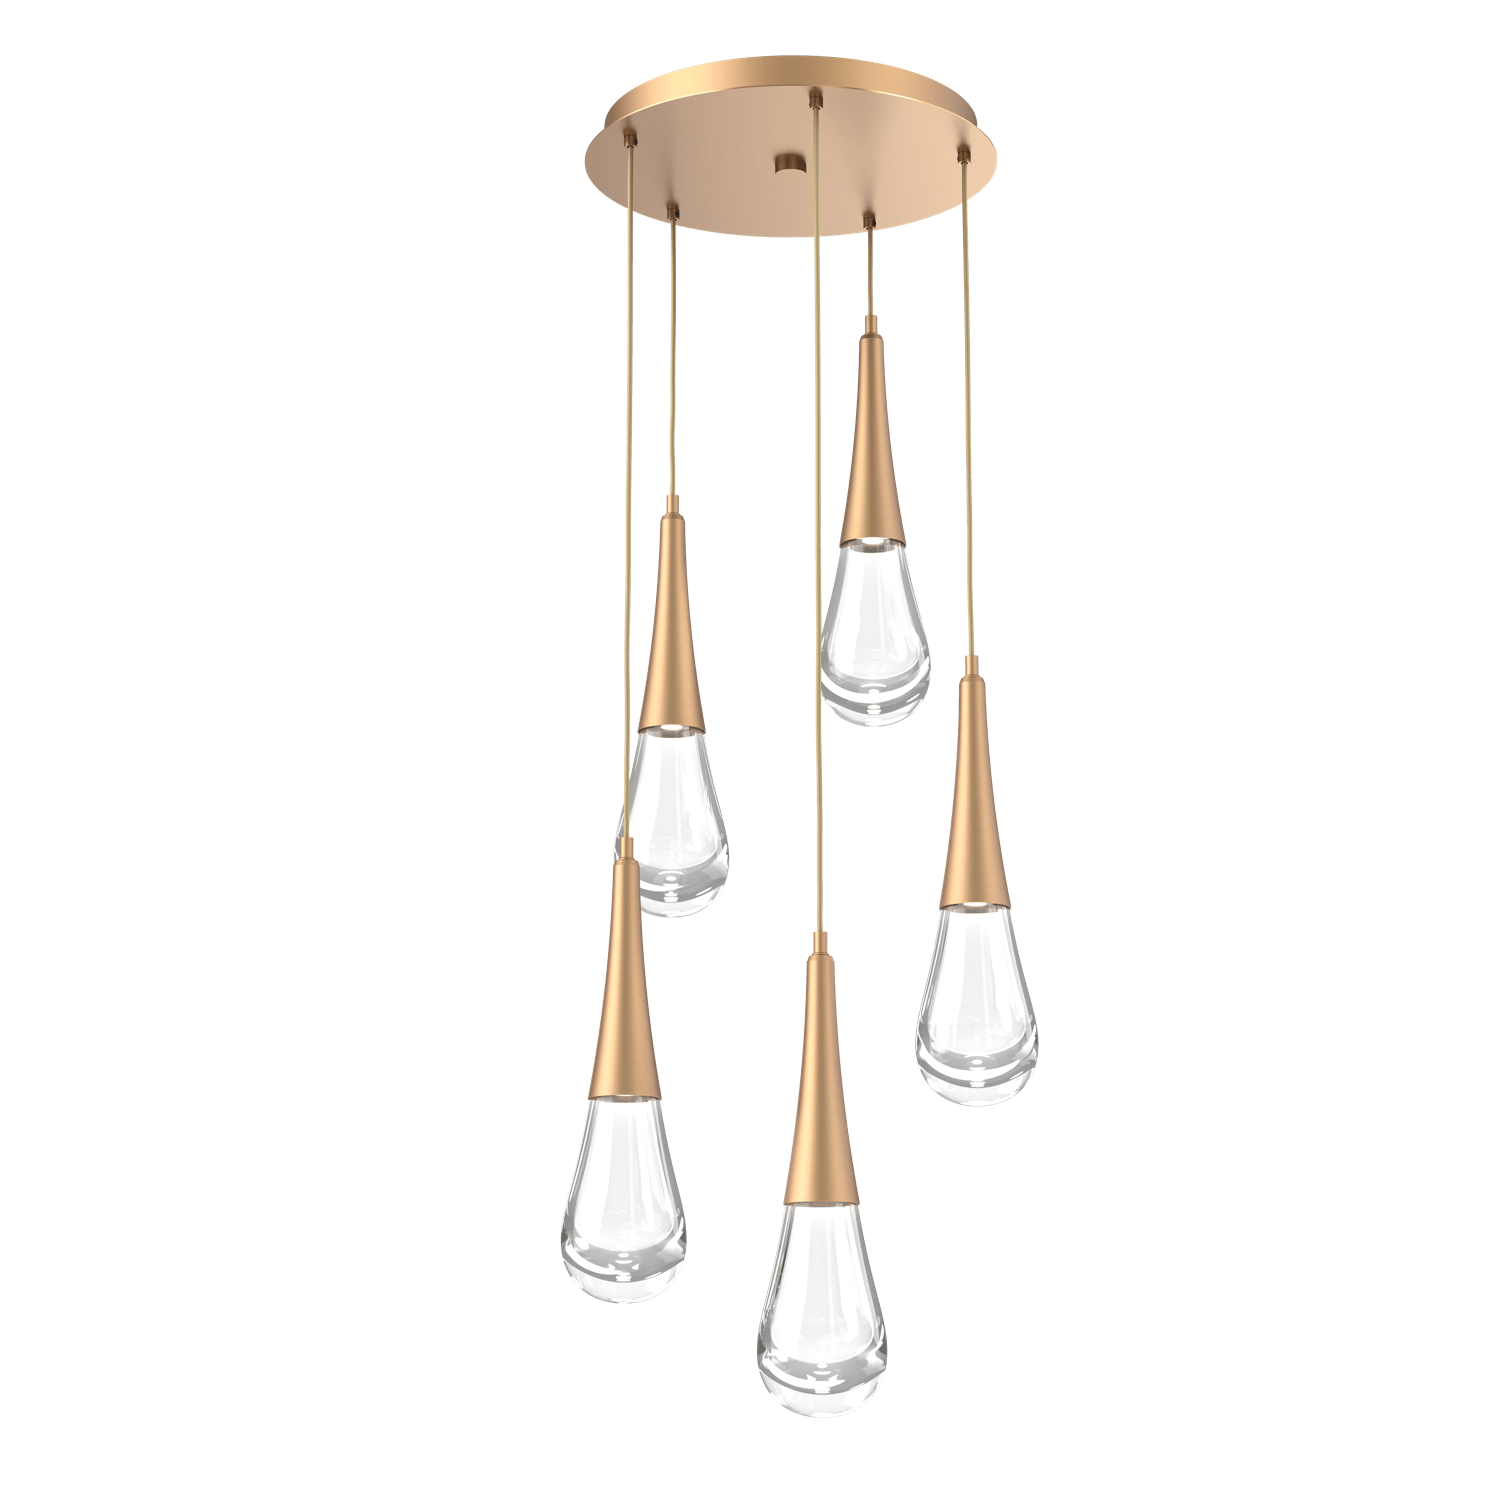 CHB0078-05-NB-Hammerton-Studio-Raindrop-5-light-round-pendant-chandelier-with-novel-brass-finish-and-clear-blown-glass-shades-and-LED-lamping